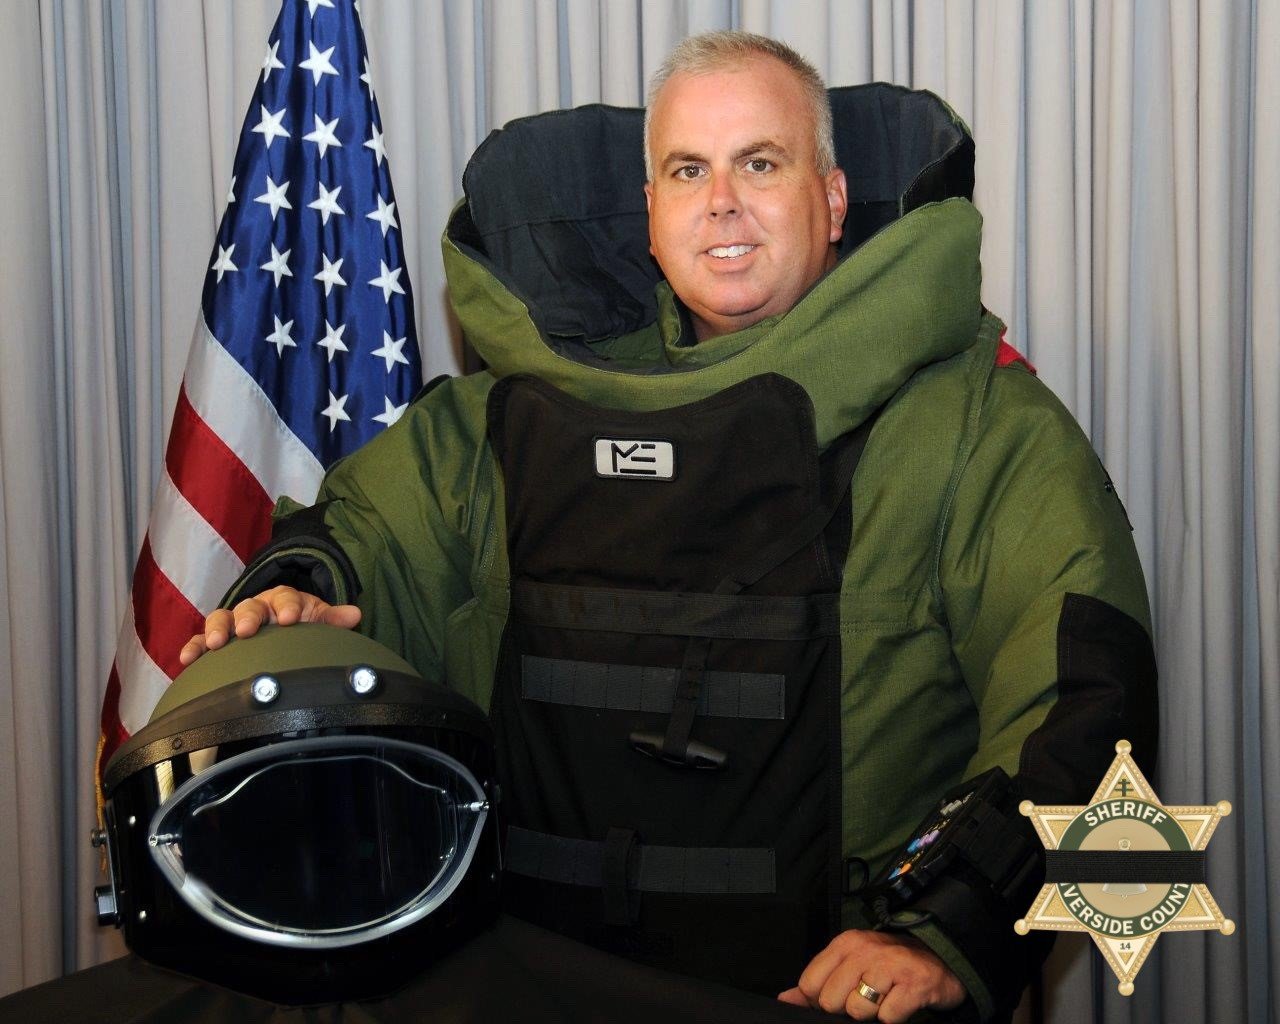 A person wearing a bulky green and black bomb squad suit stands with a hand resting on a helmet. An American flag is visible in the background, and there is a sheriff's badge for Riverside County in the lower right corner, capturing a moment that could be featured in Berkeley Journalism.